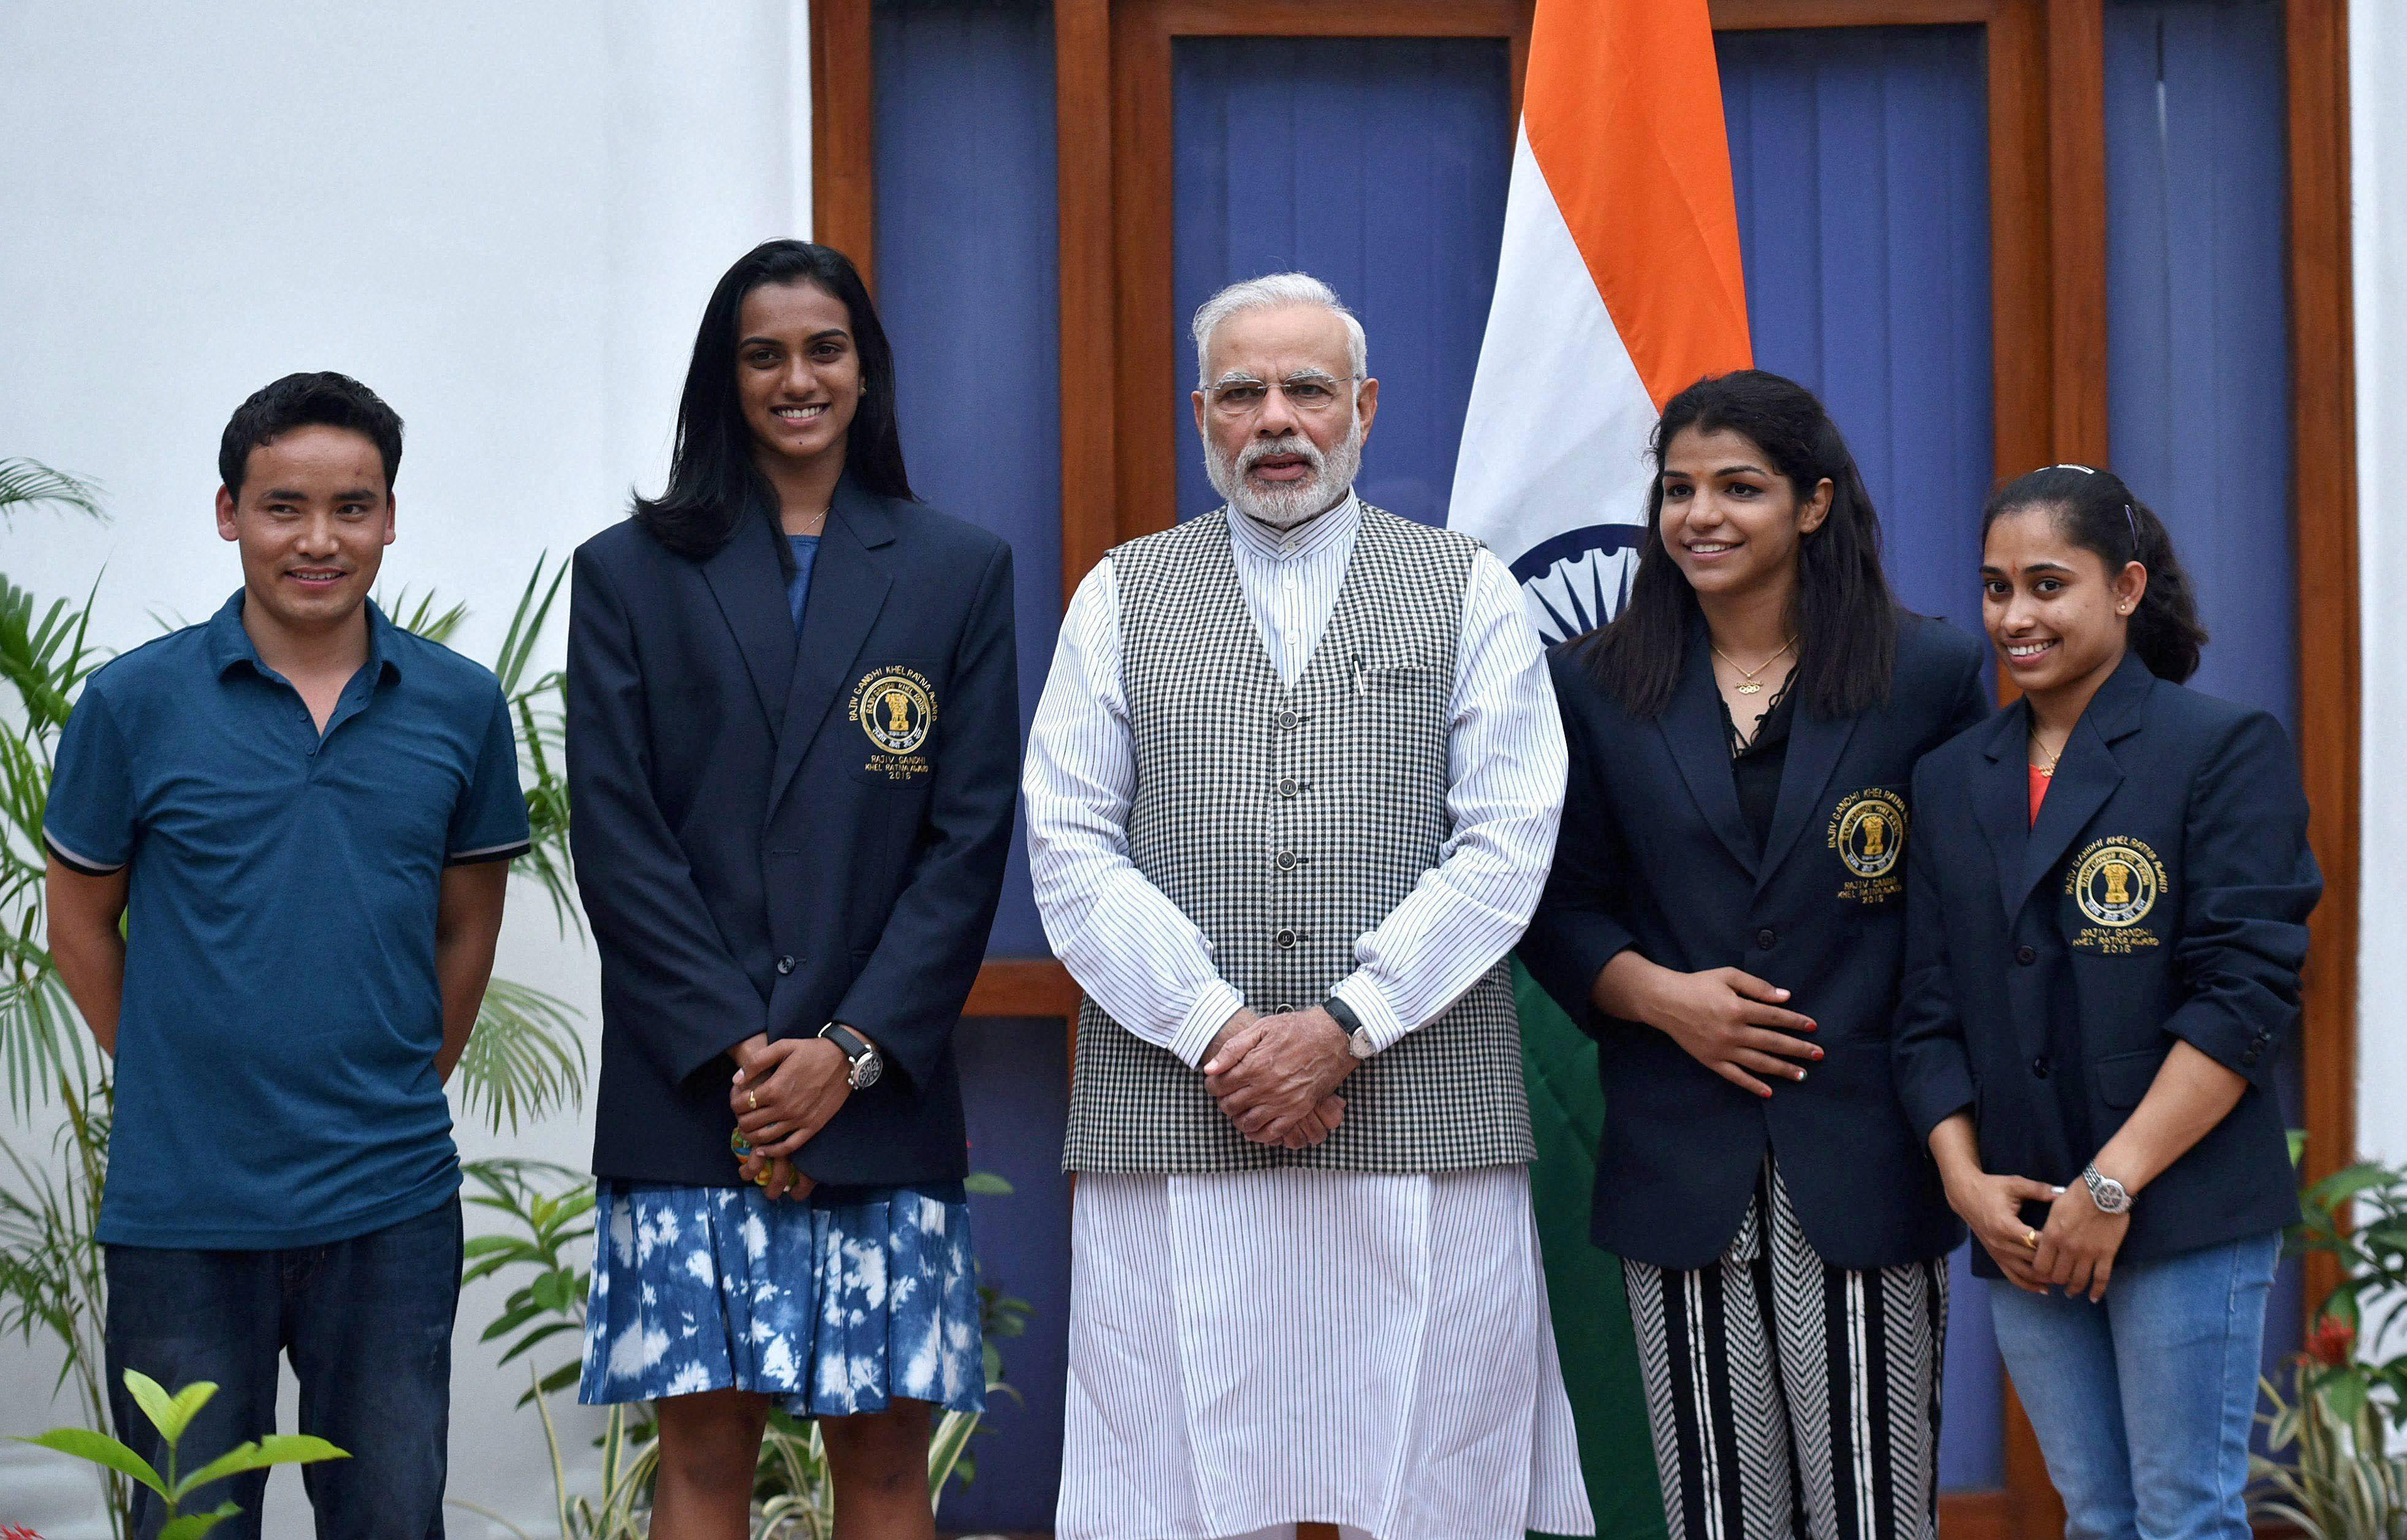 PM Modi decides the action plan for the next three Olympics